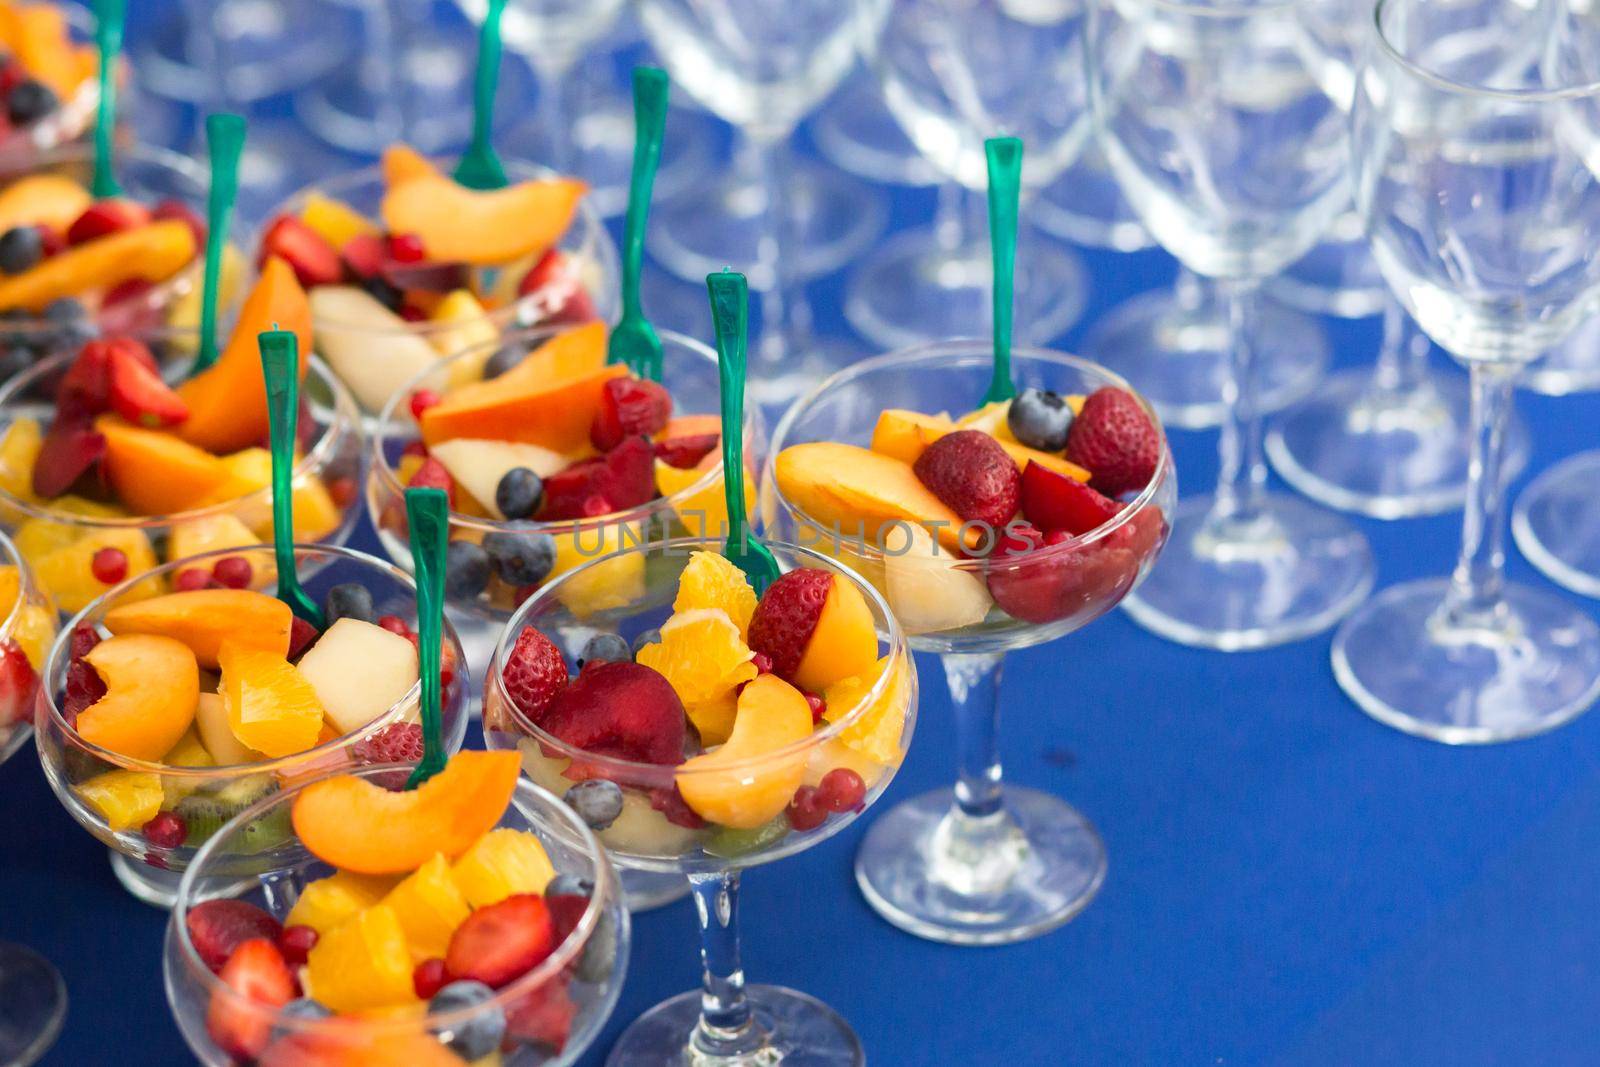 Fruit desserts on the table for a festive event or dinner